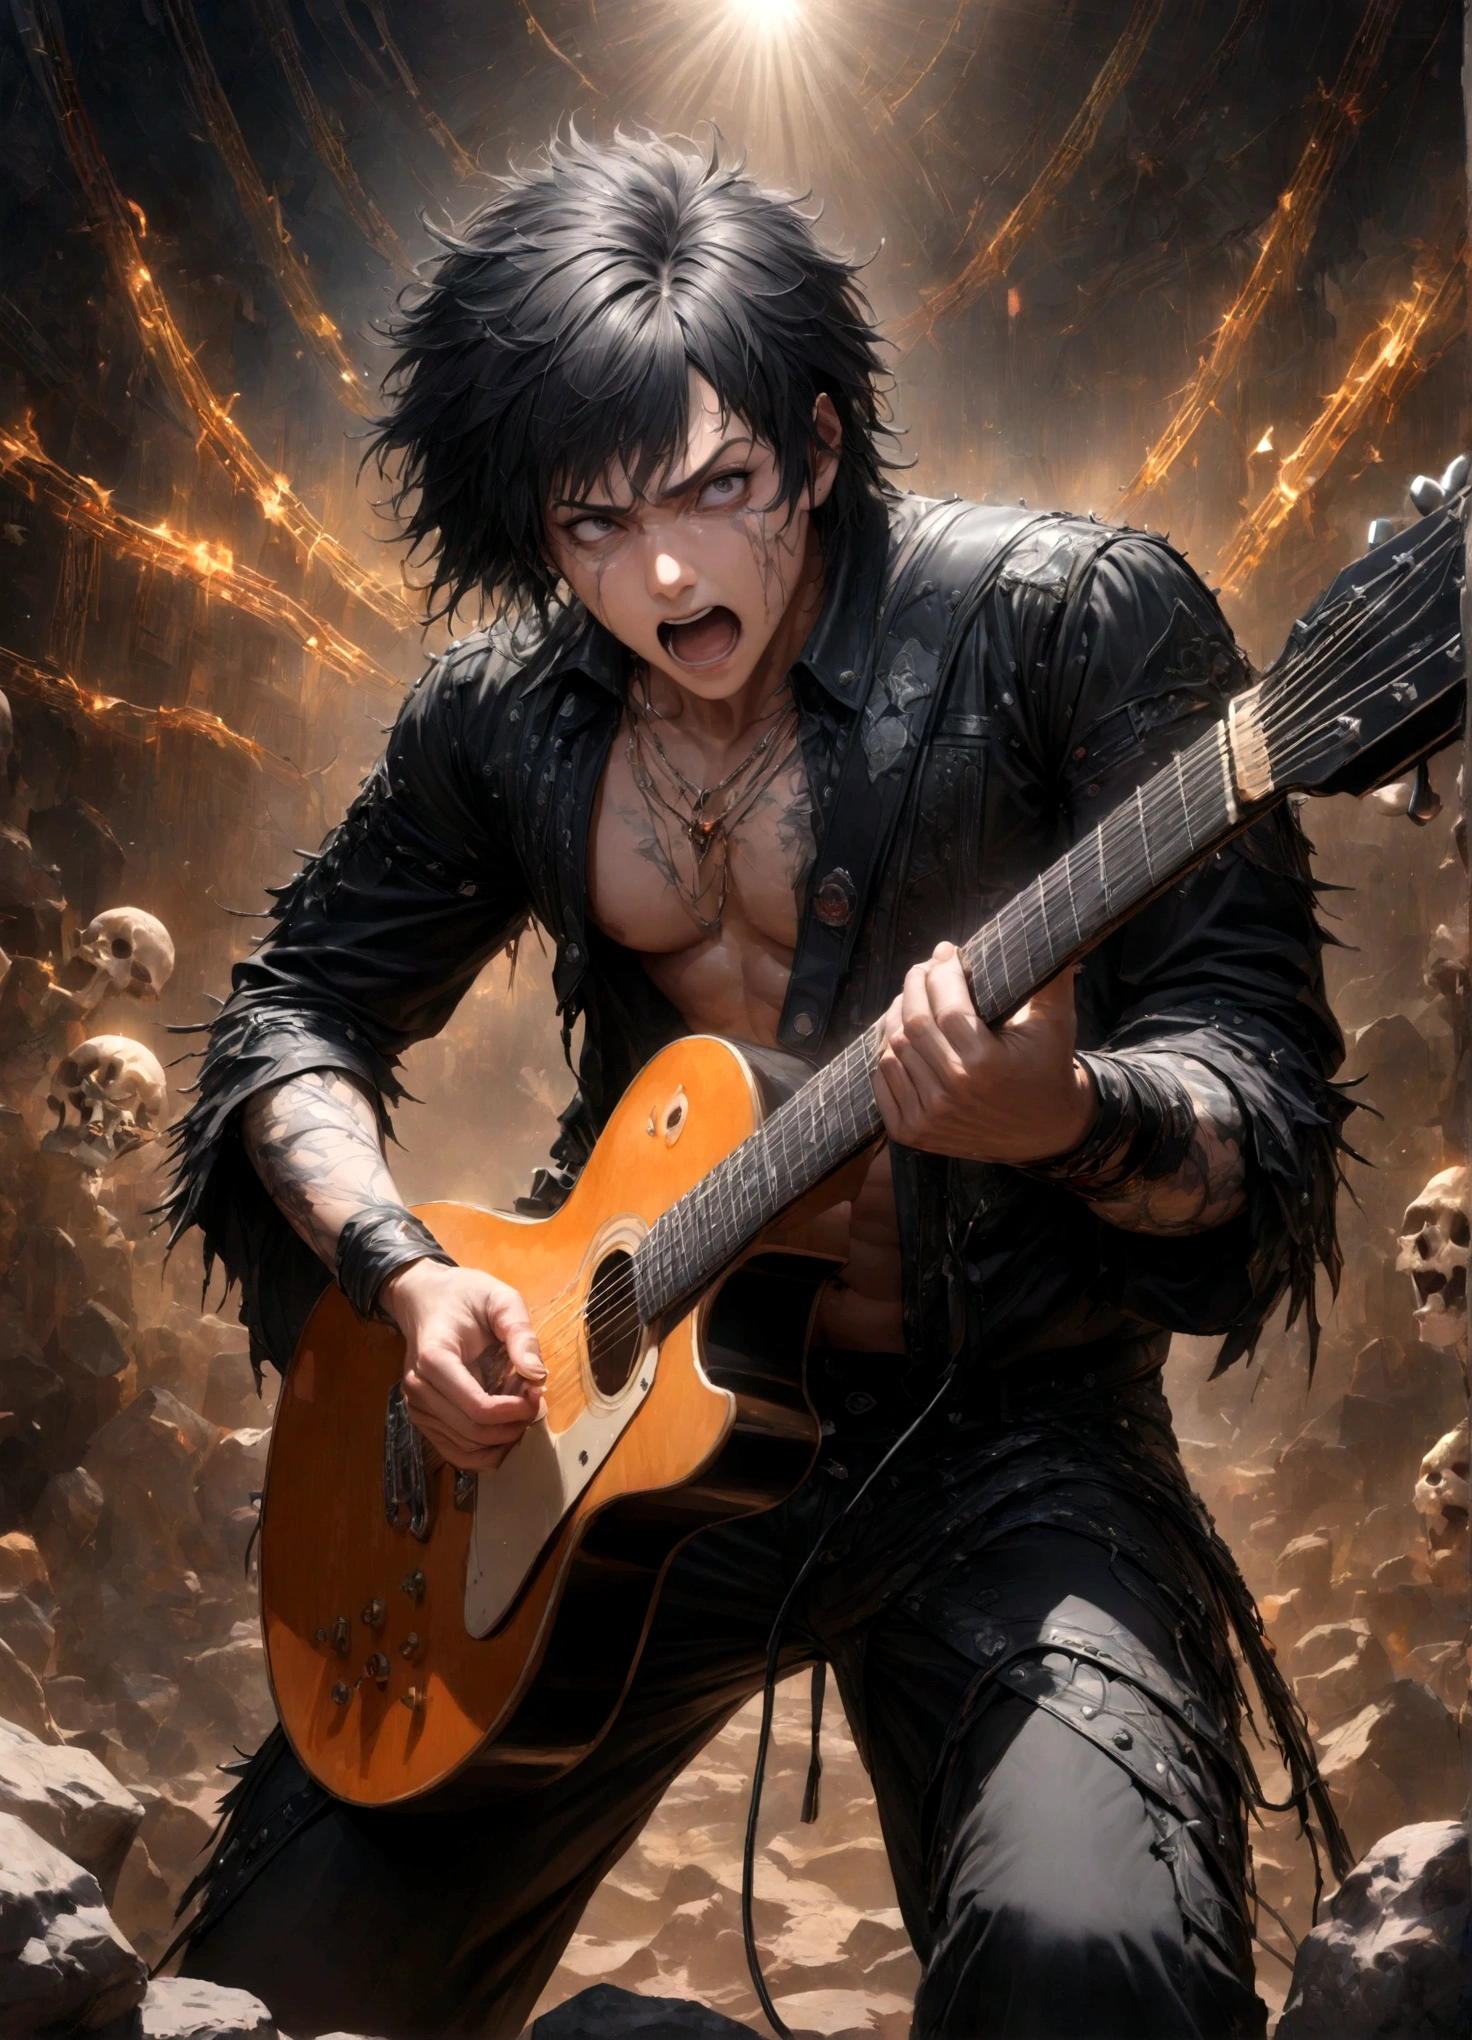 1 male,close up shot,focus on men,moderately muscular,The man is a guitarist and vocalist in a rock band.,neutral black short hair,the man is facing forward,A man is playing a black electric guitar,(masculine face),The man looks like he's half yellow and half white.,((Singing as if screaming: 1.3)),photoreal,Black rock musician costume details,angry face,suffering,sorrow,anatomically correct,(masterpiece:1.3),(highest quality:1.4),(ultra detailed:1.5),High resolution,extremely detailed,unity 8k wallpaper,draw artistic background,(Draws an abstract and decadent image in the dark,with a large number of gray skeletons and colorful musical notes),(Please vary the size of the notes to create a sense of perspective),beautiful light and shadow,This image is a rock music poster,Please draw the man carefully and intricately.,dark fantasy,intricate details,unbelievably absurd,energetic,rock,cool,punk rock or hardcore music,concert venue lighting,BREAK,Black rock musician costume details,(masterpiece:1.3),(highest quality:1.4),(ultra detailed:1.5)